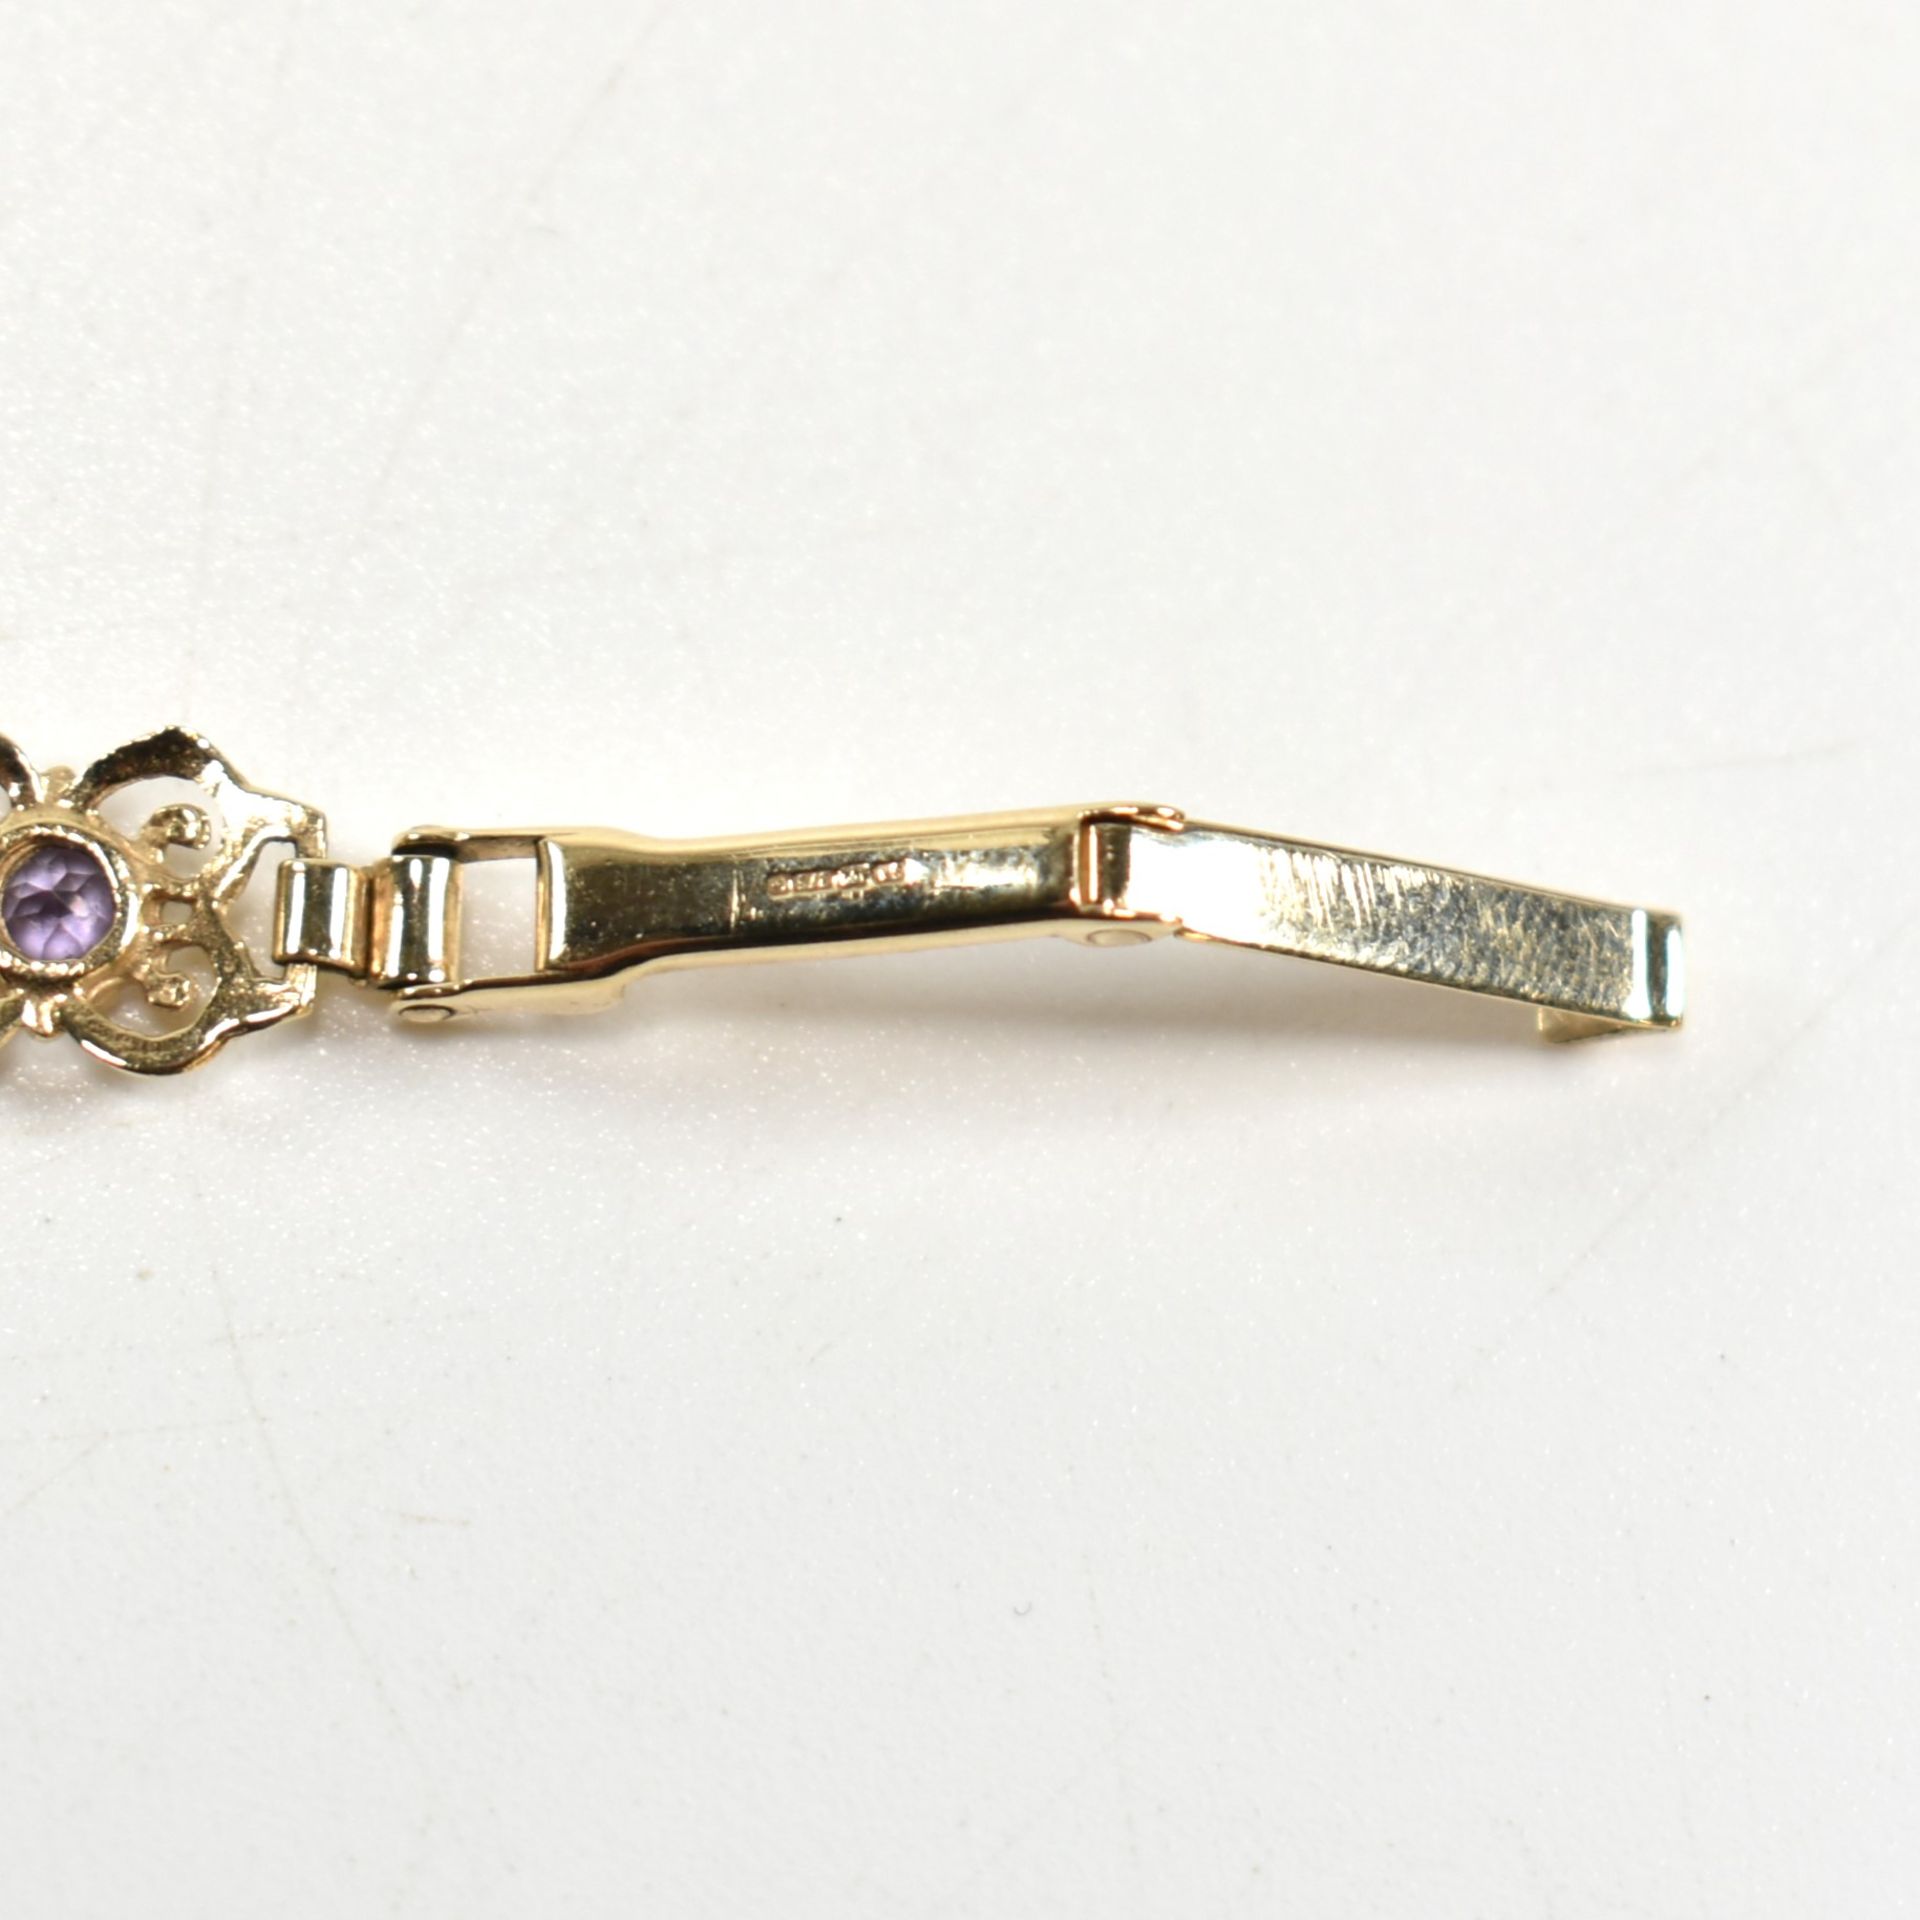 HALLMARKED 9CT GOLD SOVEREIGN WRISTWATCH WITH PURPLE STONES - Image 5 of 5